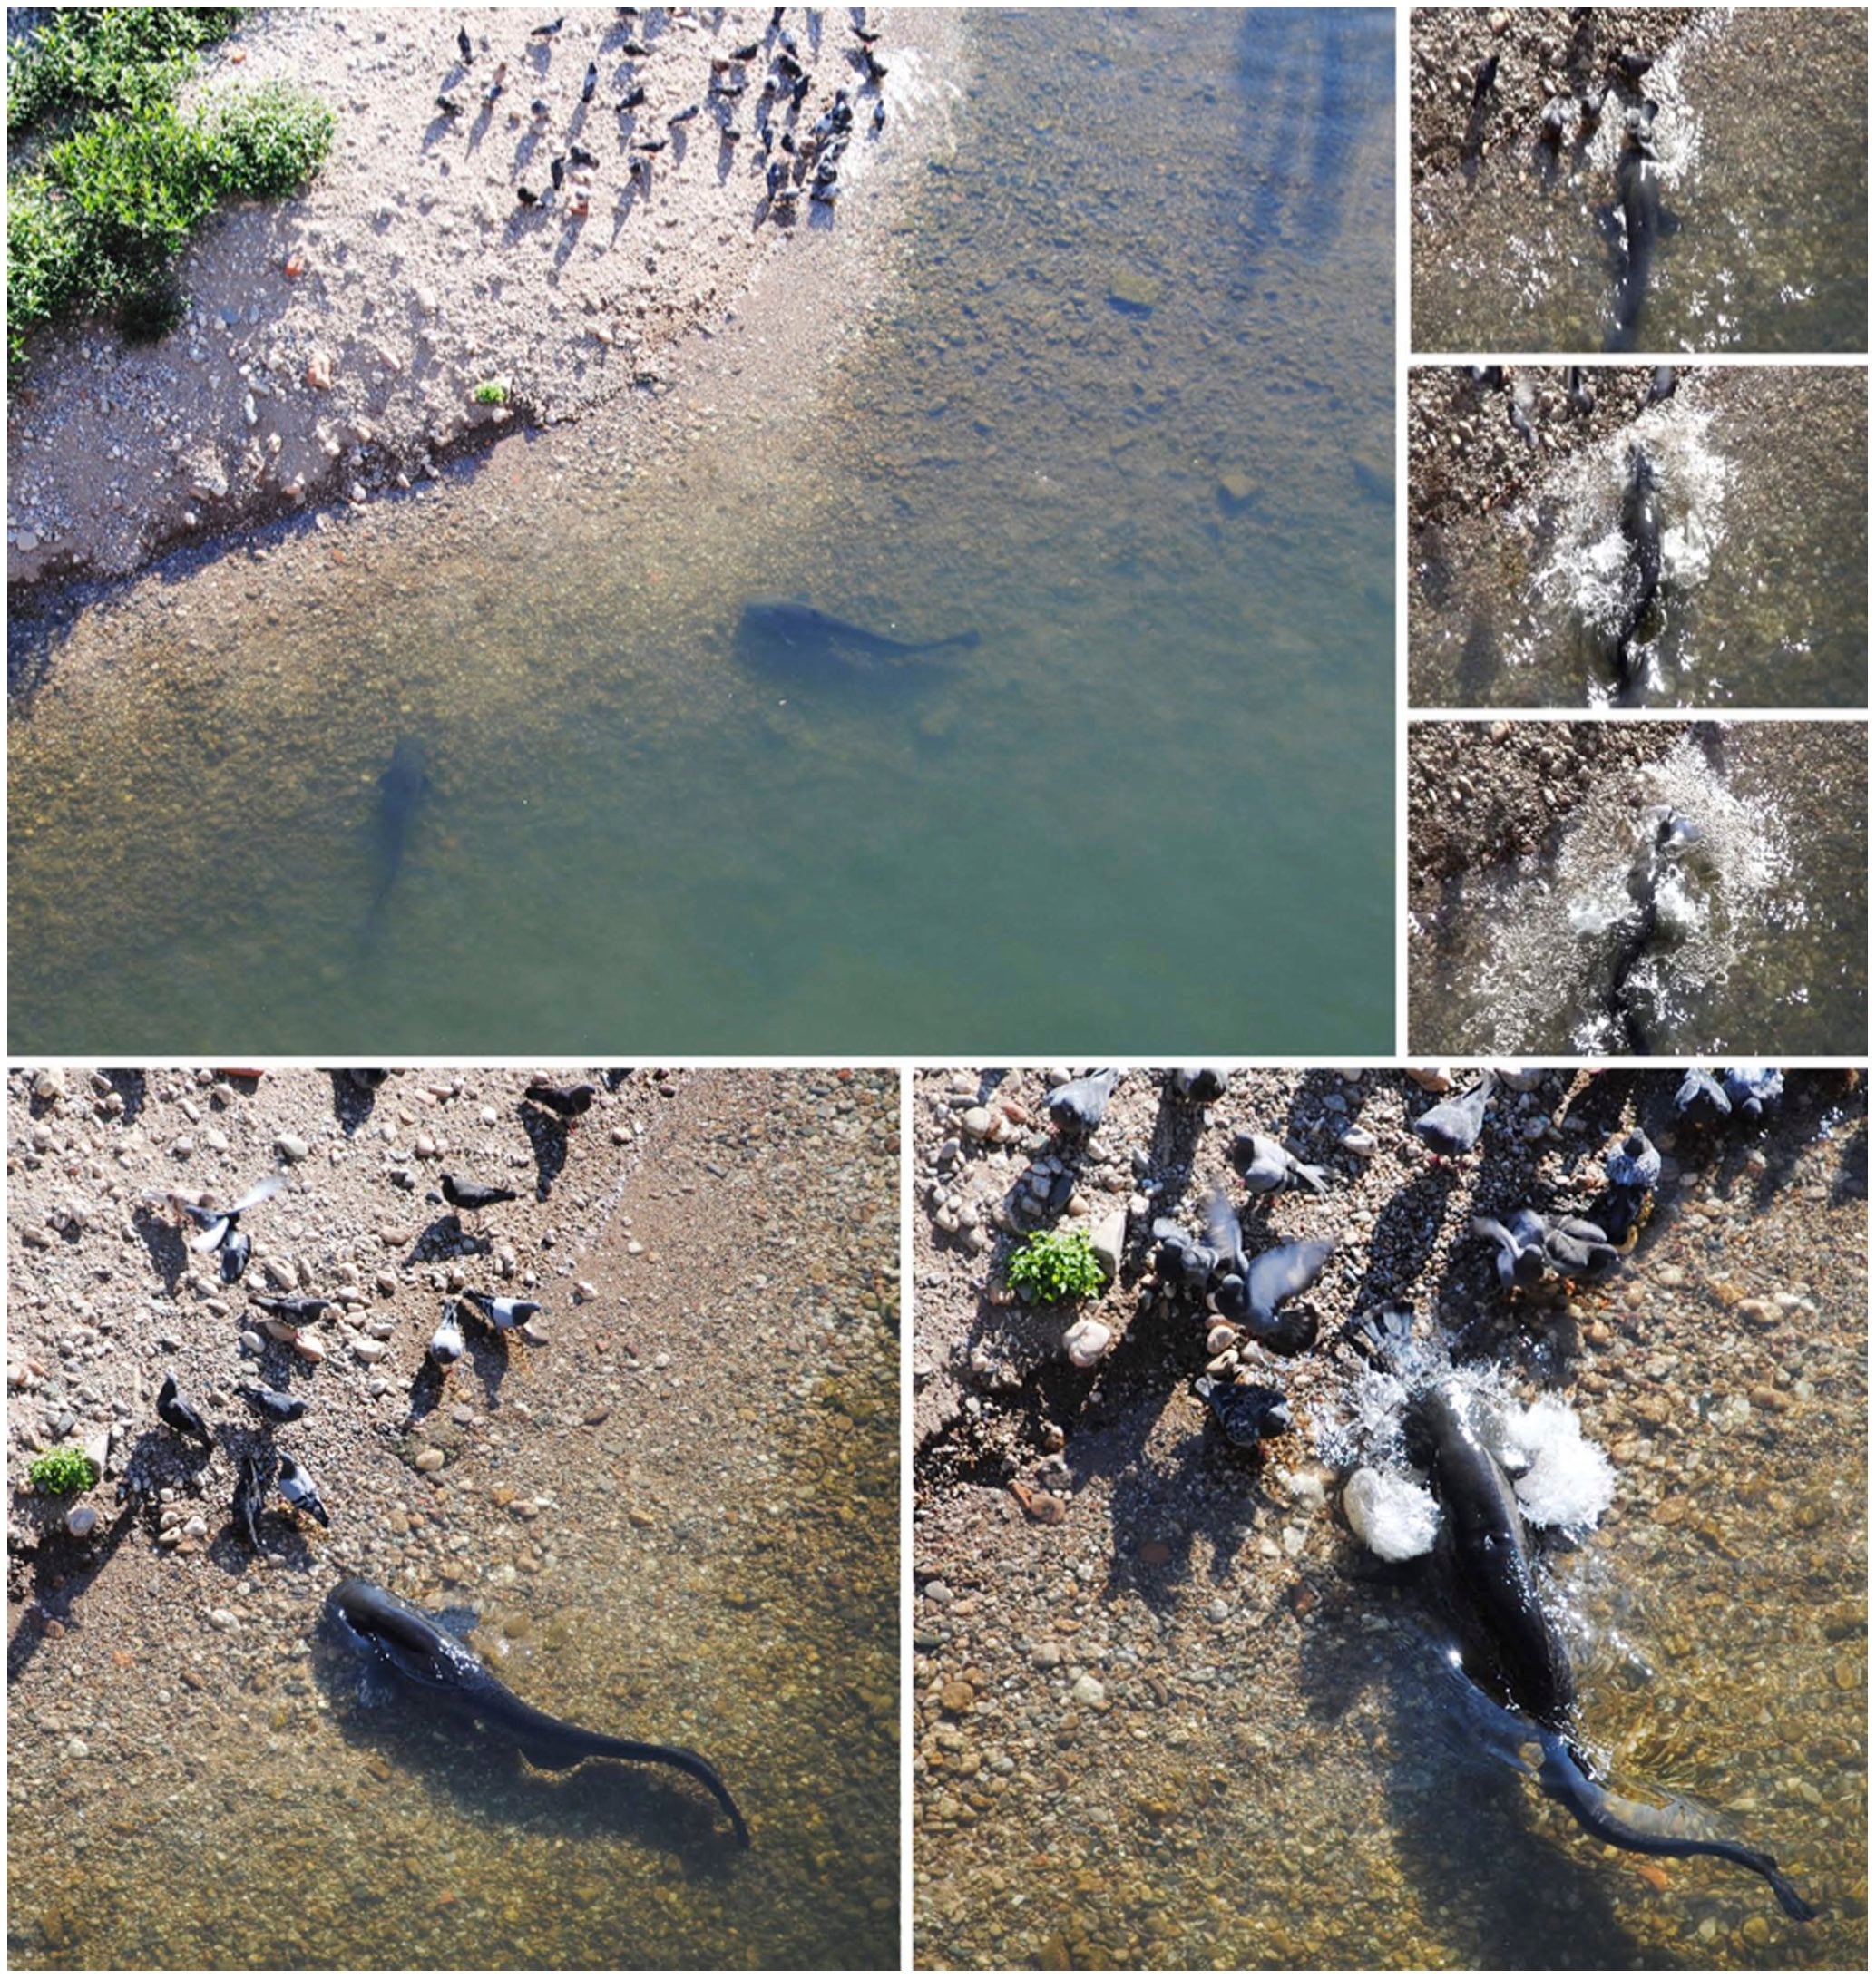 European catfish displaying beaching behavior to capture land birds.Several individuals were observed swimming nearby the gravel beach in shallow waters where pigeons regroup for drinking and cleaning (large picture). One individual is seen approaching land birds and beaching to successfully capture one (small pictures).